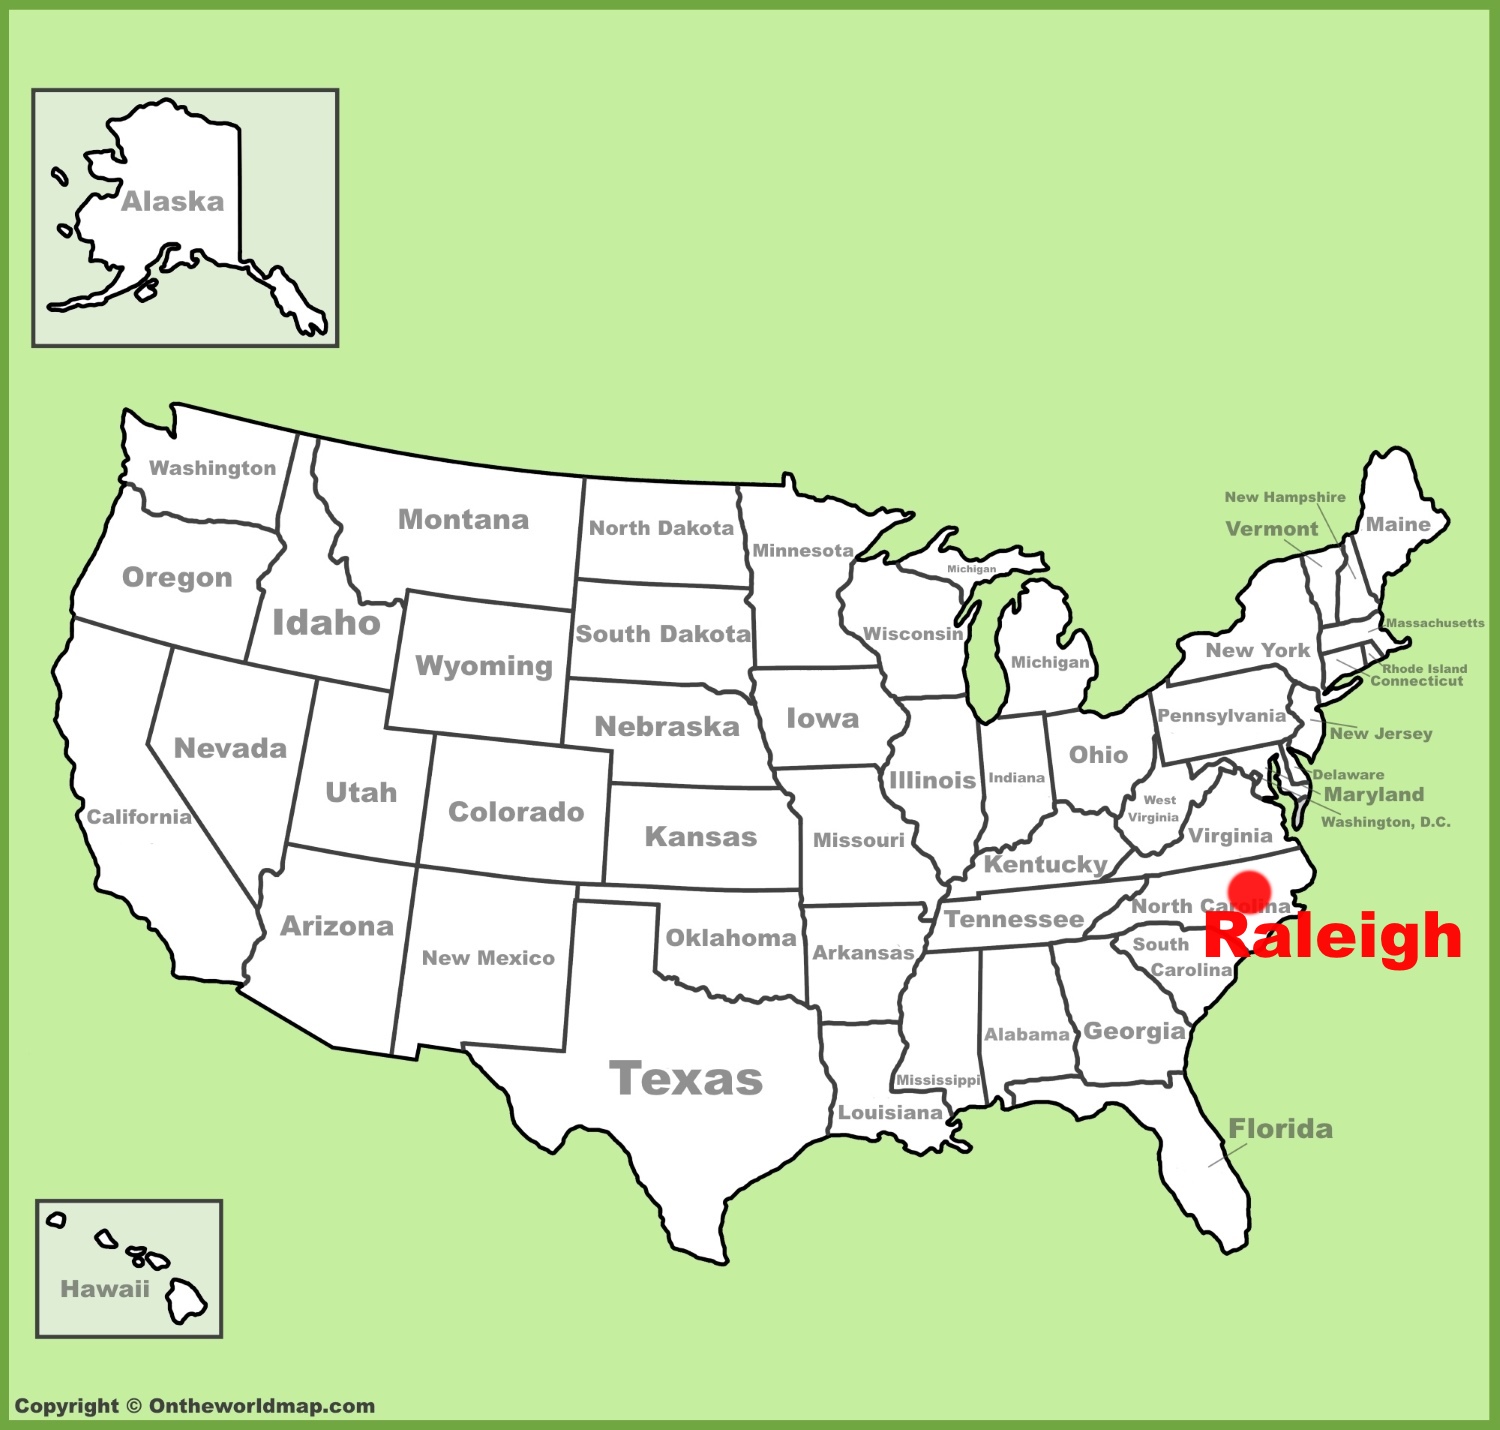 Raleigh Location On The Us Map 